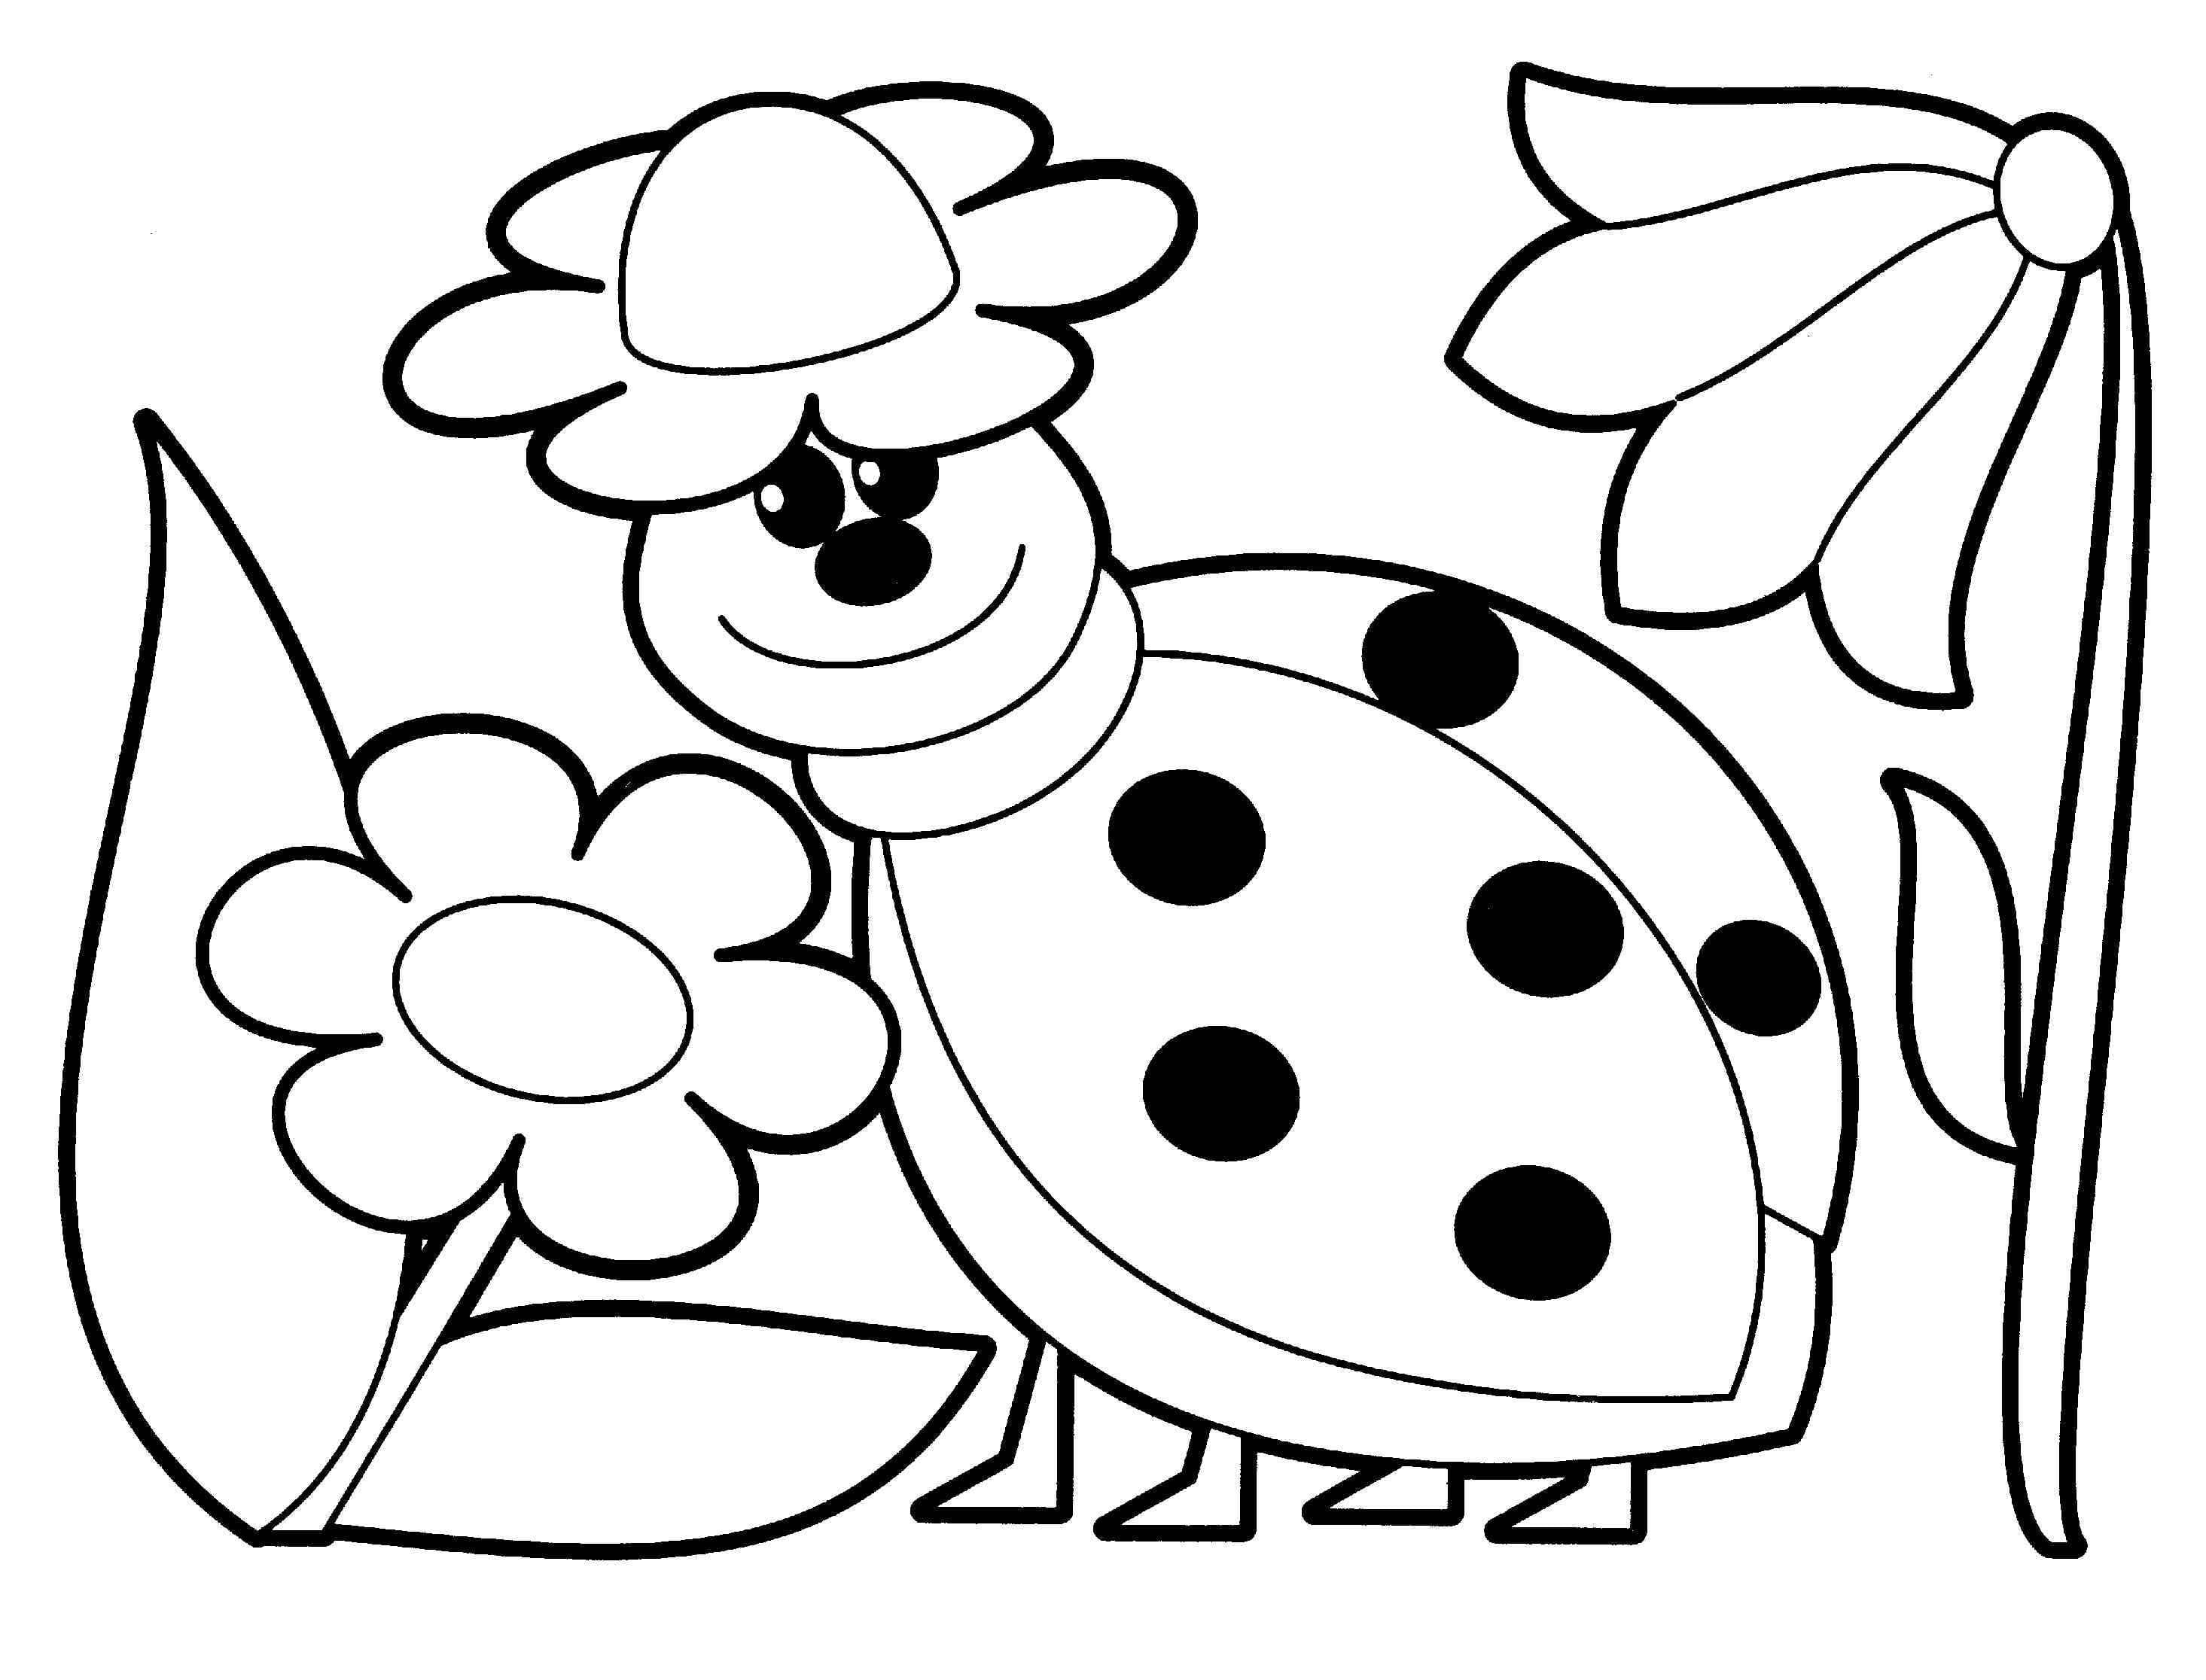 Coloring Pages for Kids 5 Years Old